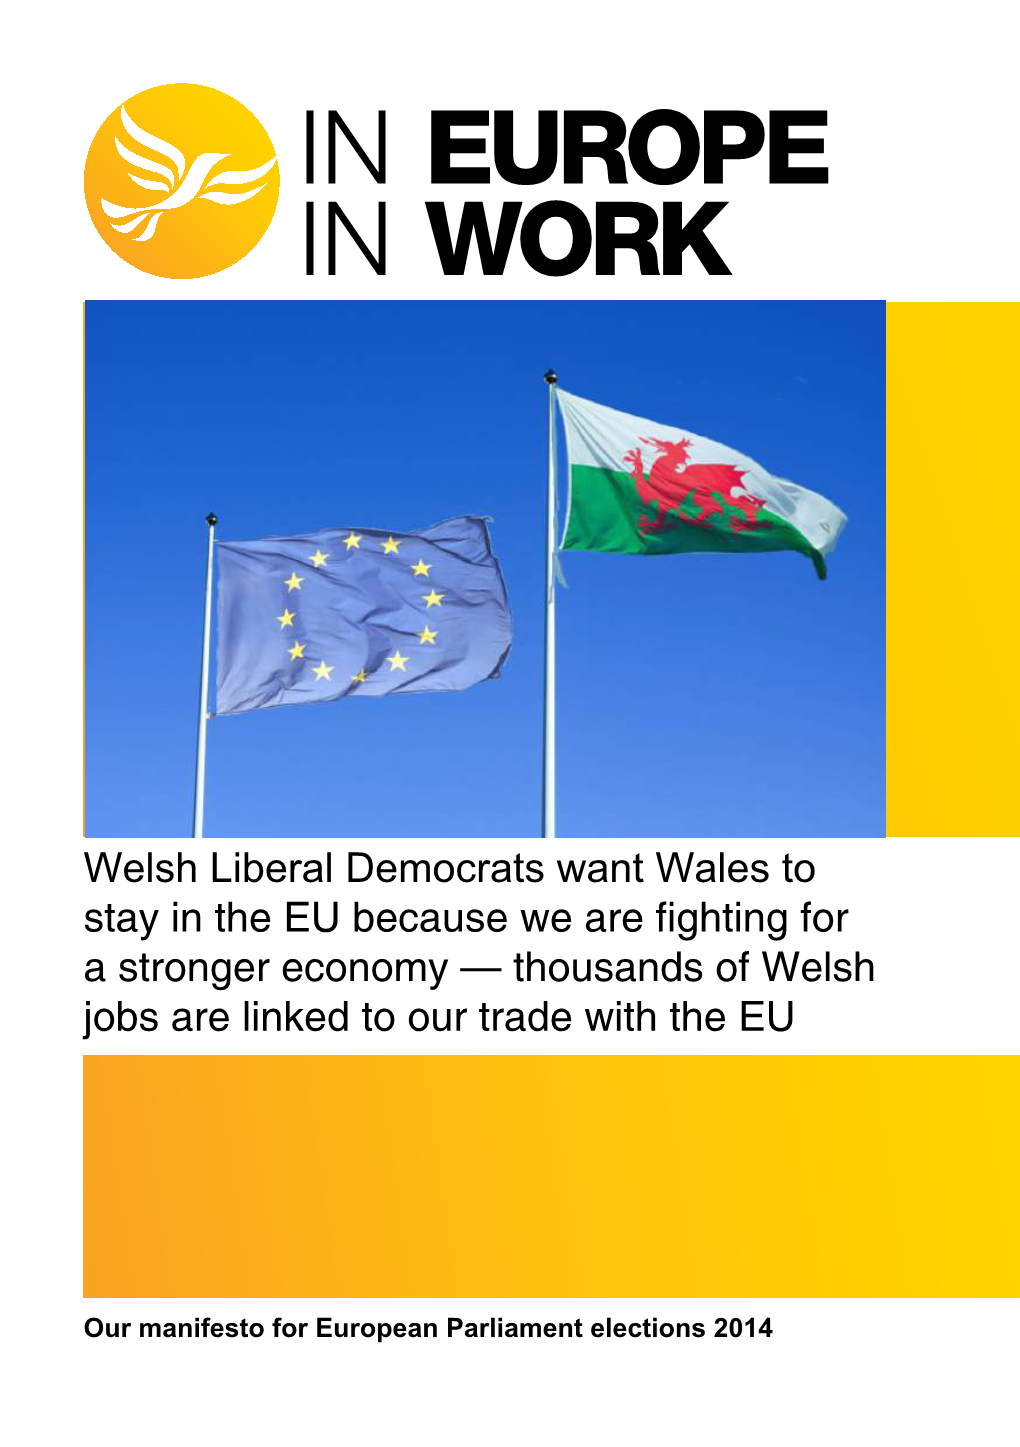 Welsh Liberal Democrats Want Wales to Stay in the EU Because We Are Fighting for a Stronger Economy — Thousands of Welsh Jobs Are Linked to Our Trade with the EU